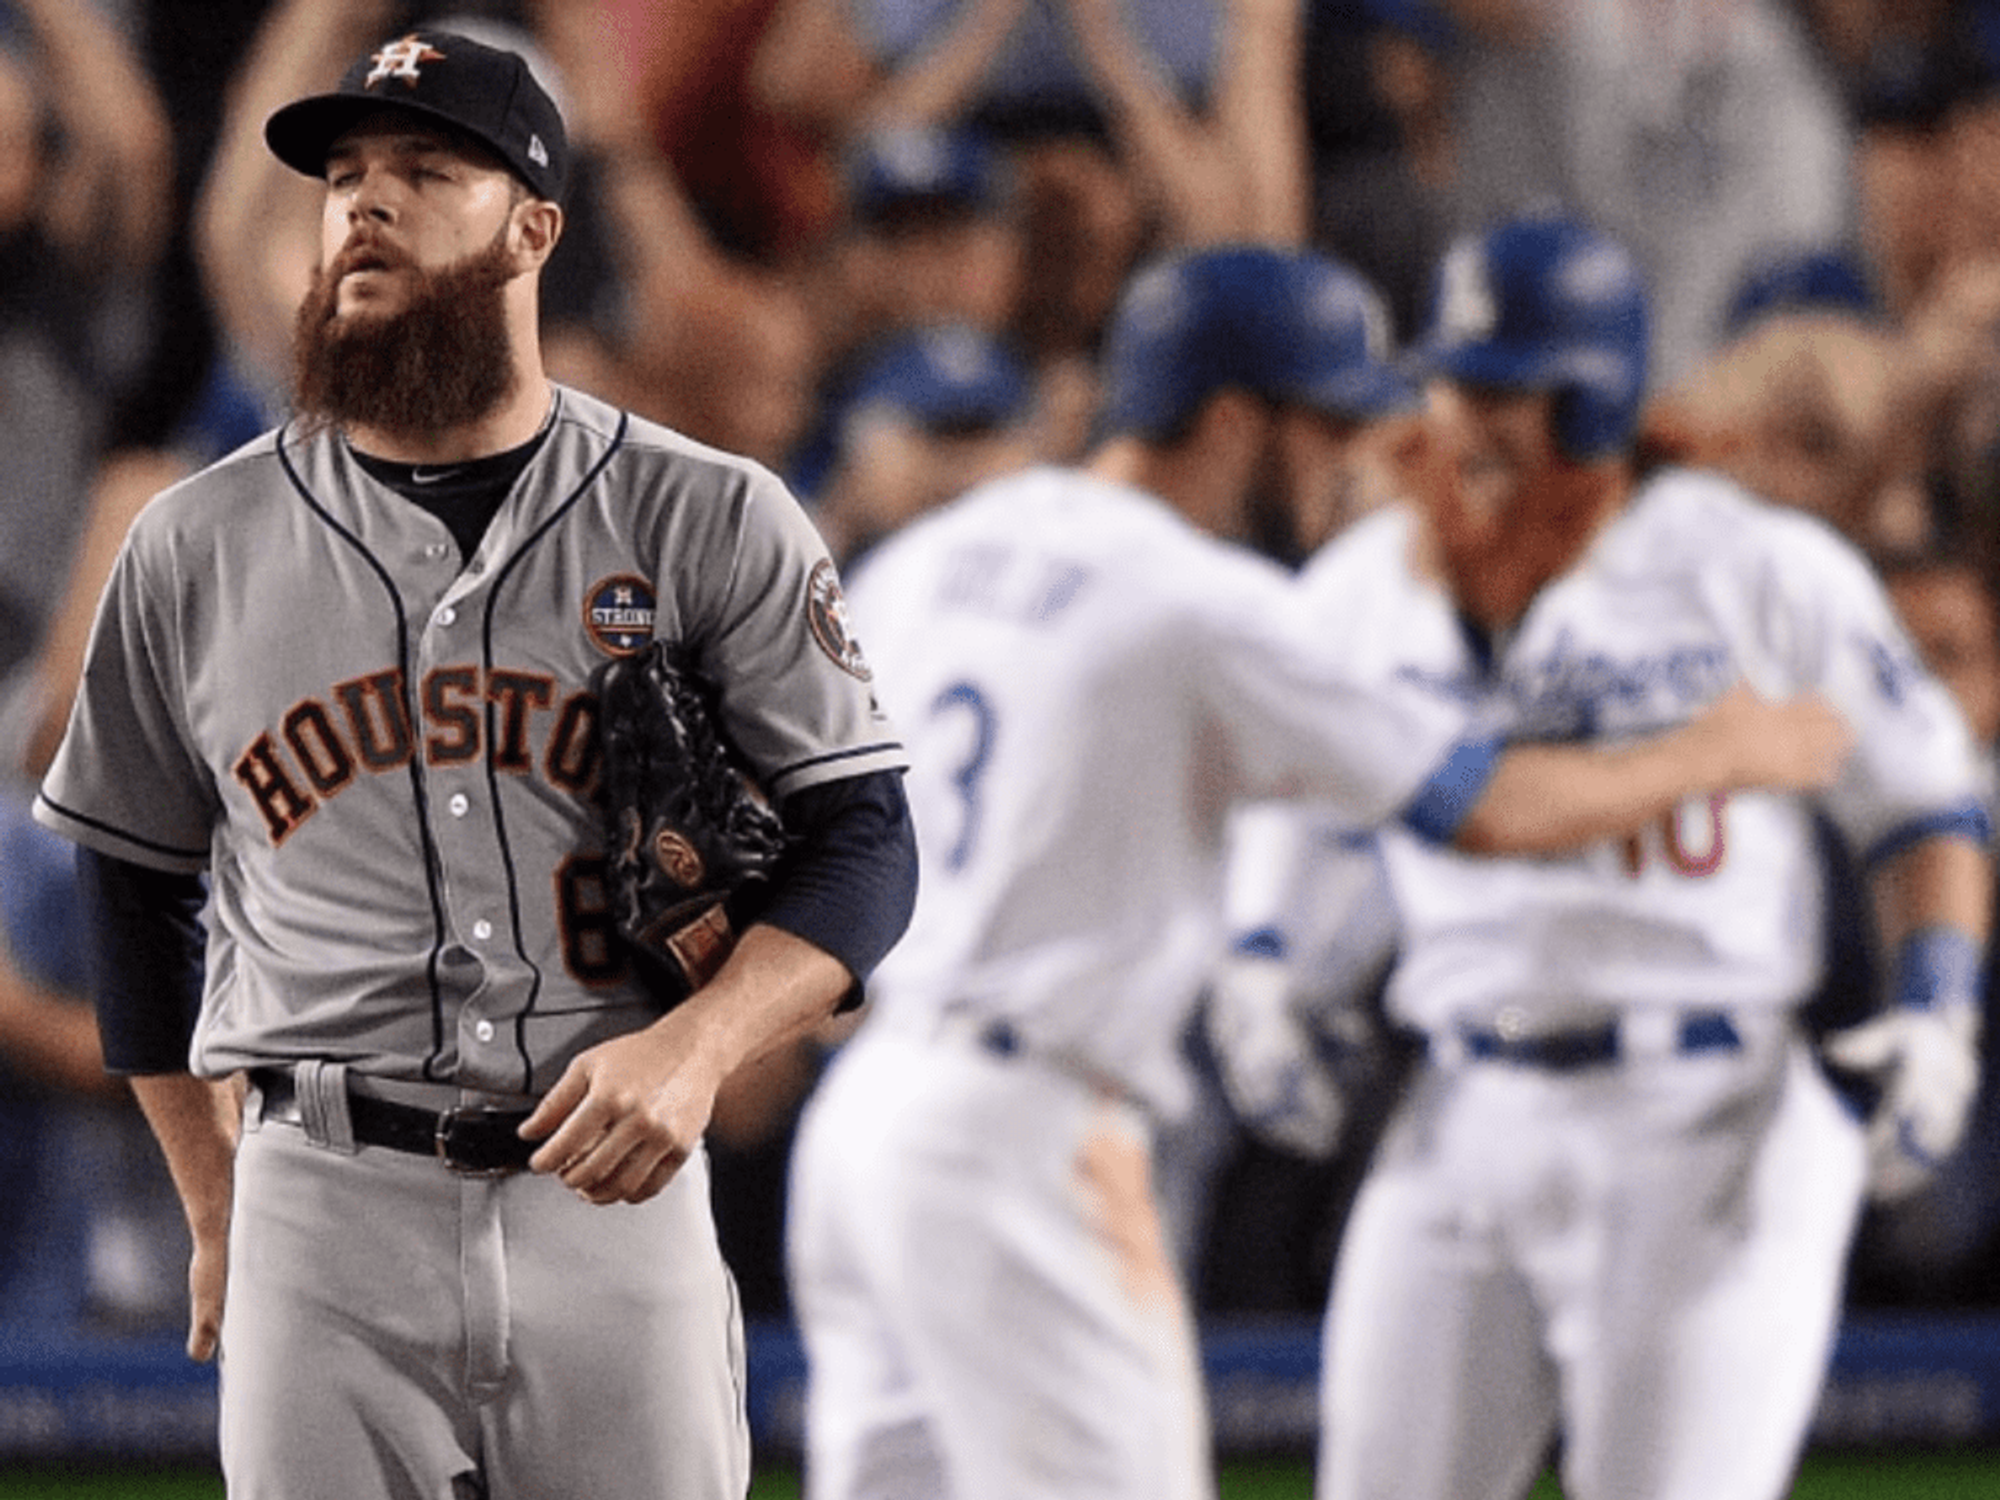 Astros pitcher Dallas Keuchel was solid, but he gave up a late home run to lose Game 1 of World Series